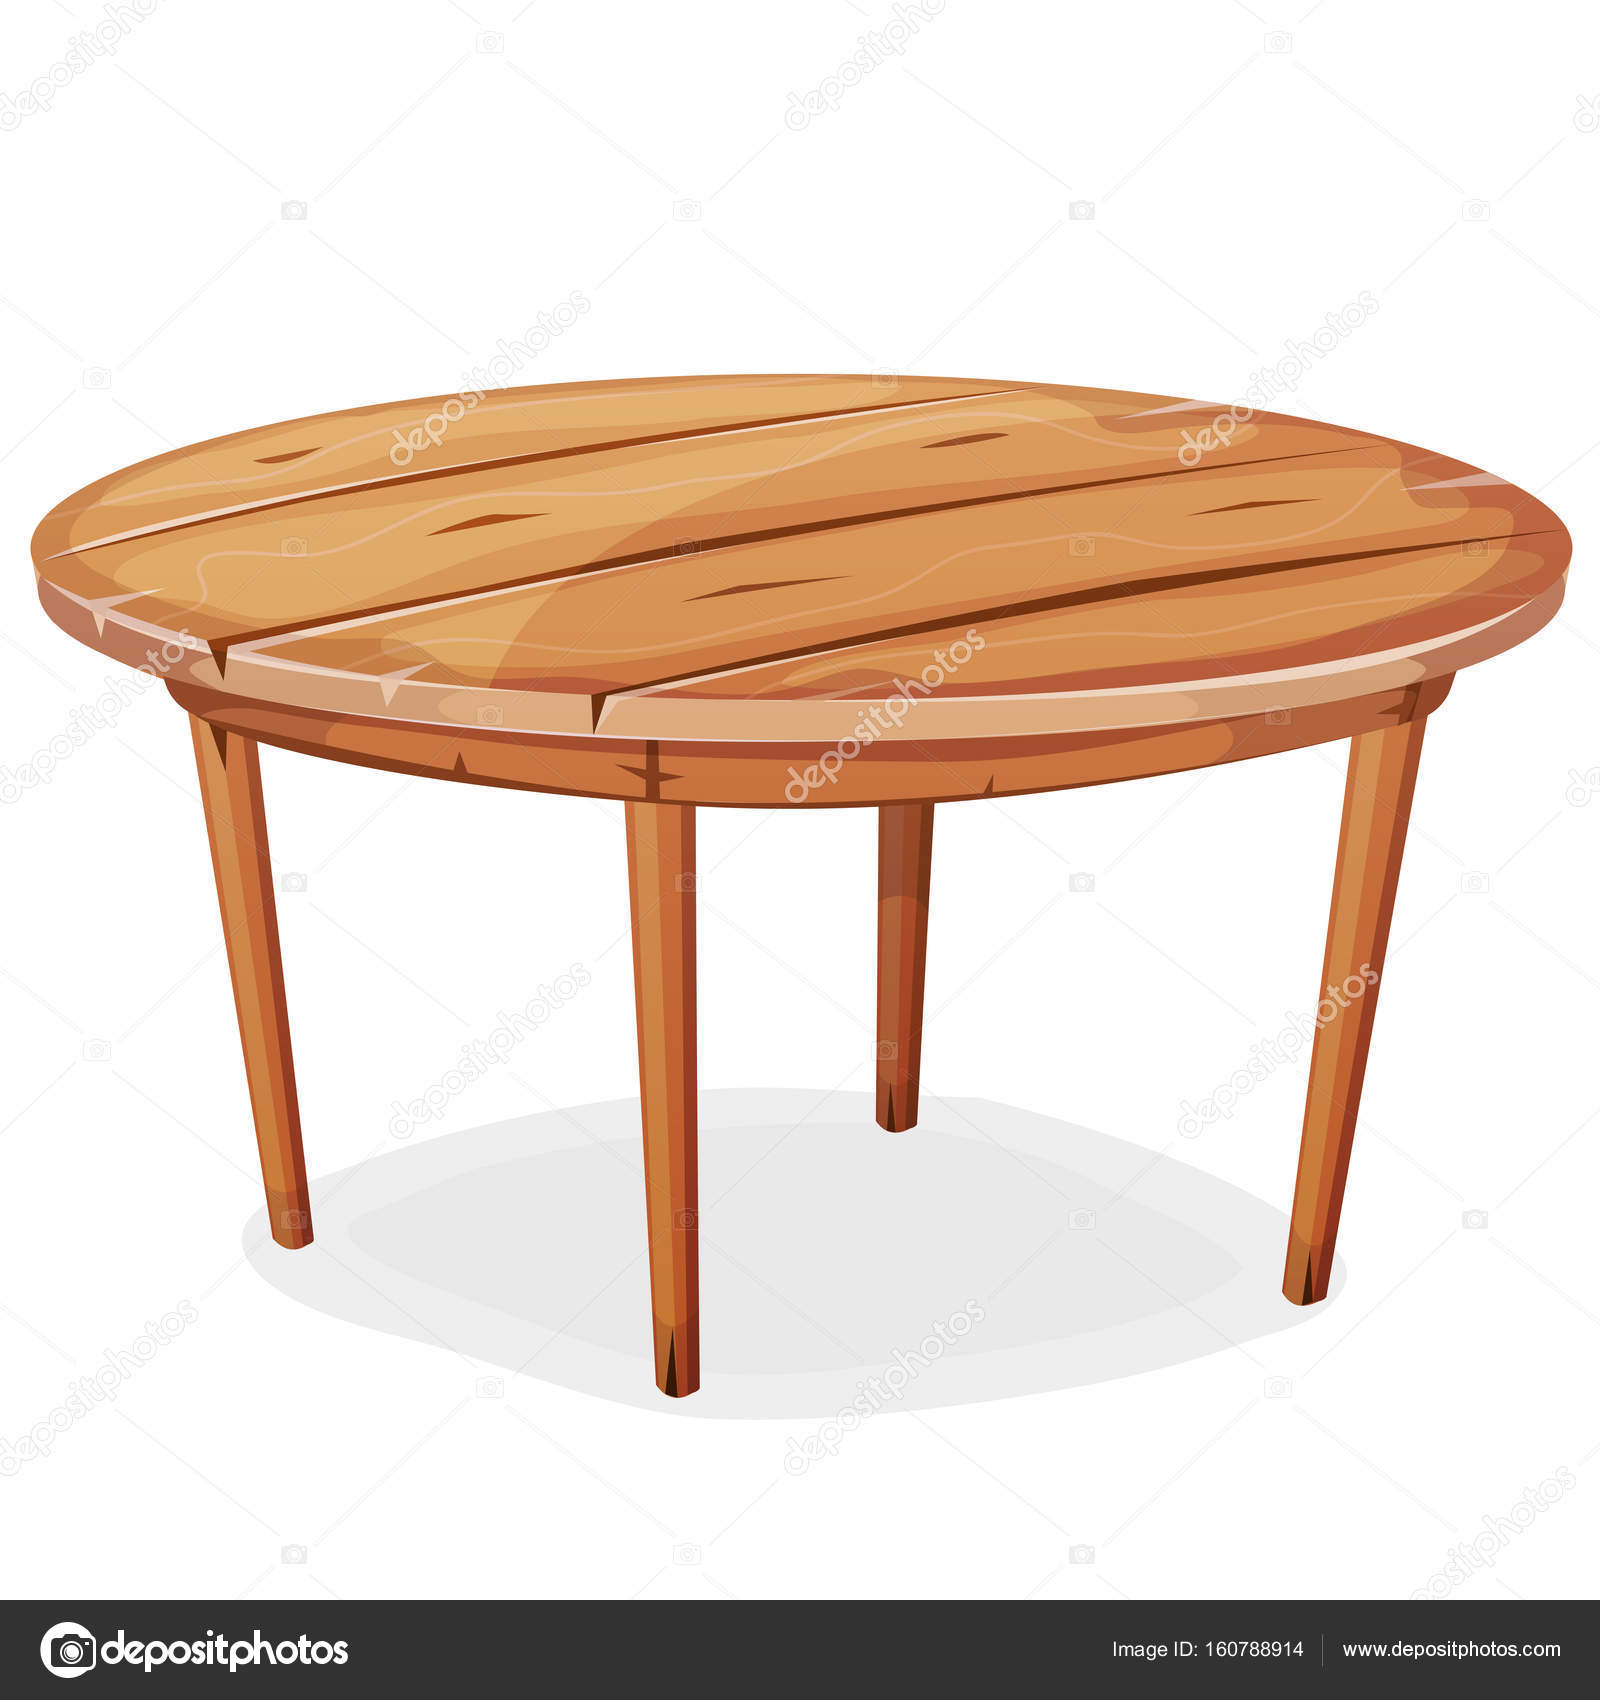 Cartoon Rounded Wooden Table Isolated White Background Vector Image By C Benchyb Vector Stock